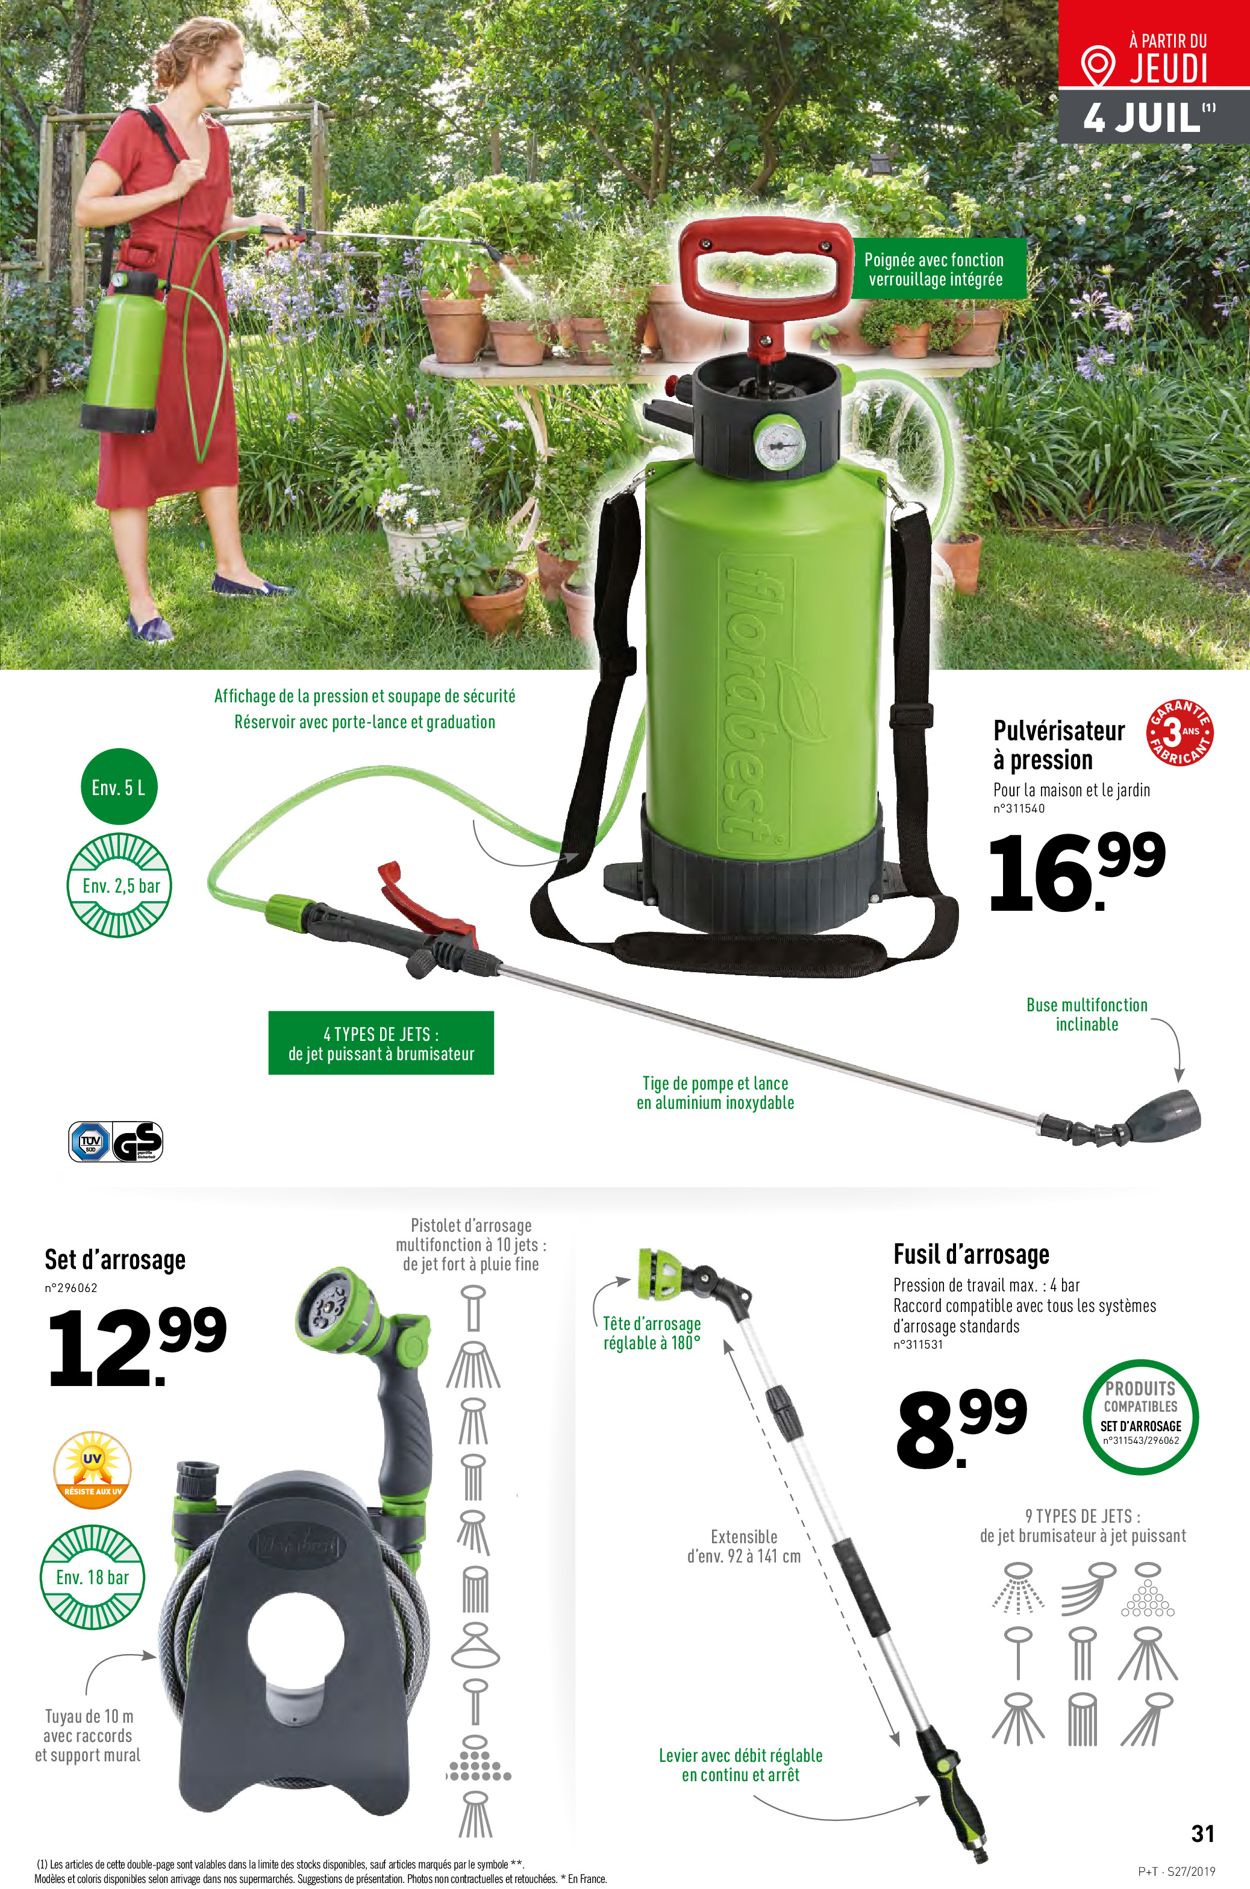 Lidl Catalogue - 03.07-09.07.2019 (Page 31)